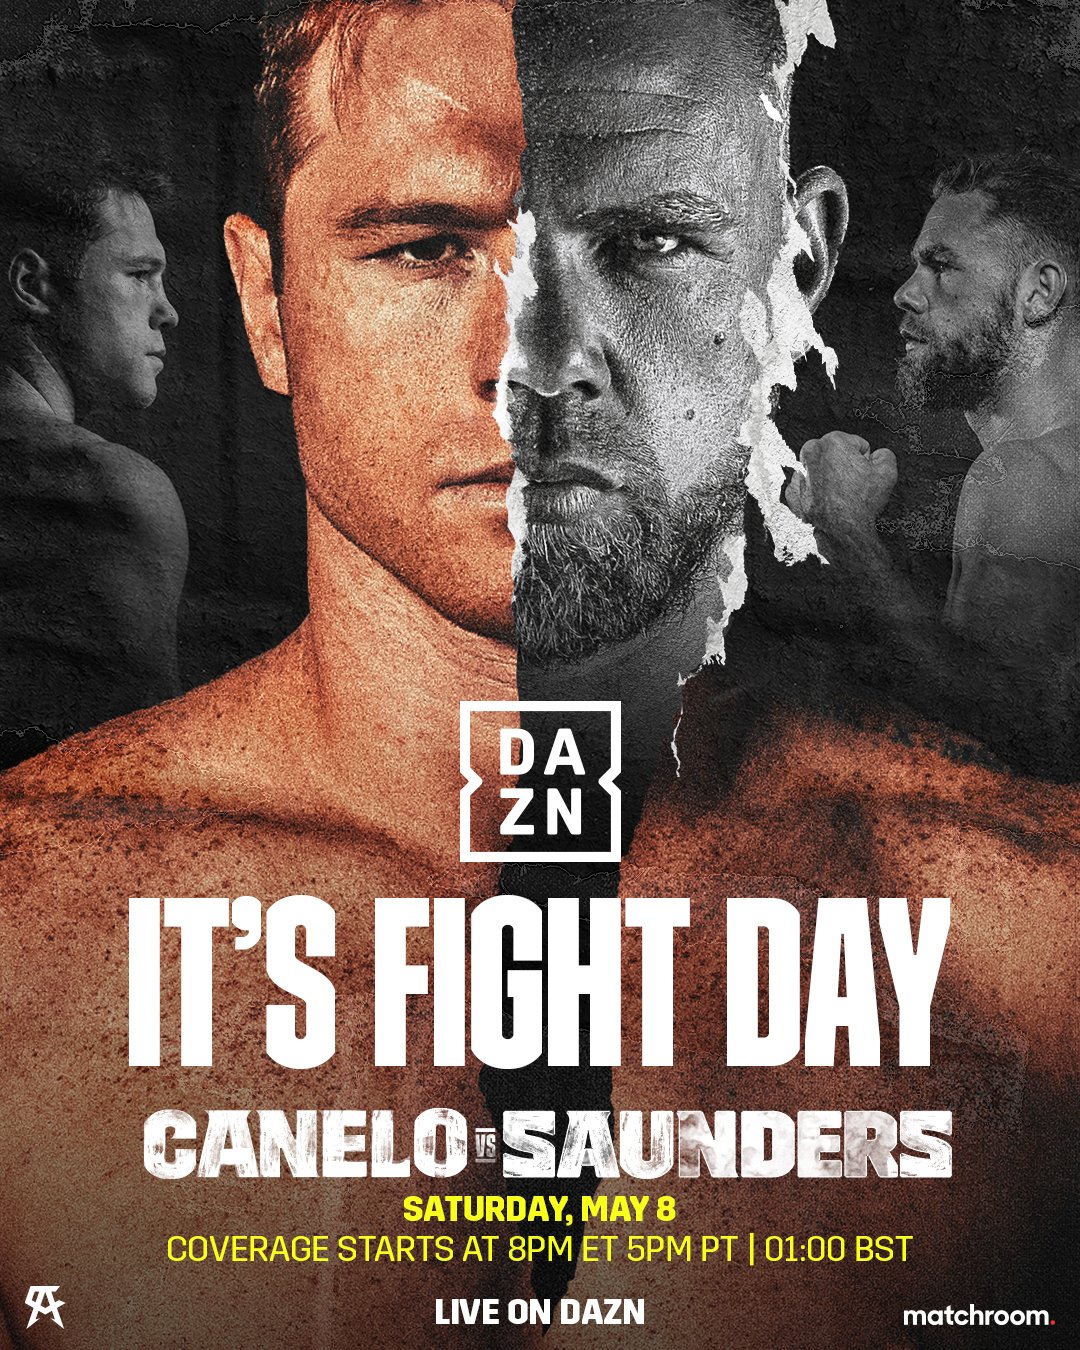 Dazn Boxing Fight Day Is Here Watch Canelosaunders Live On Dazn Worldwide Including The U S And Uk Excluding Mexico T Co 9ezsavq2n0 T Co 2np5sfym7d Twitter